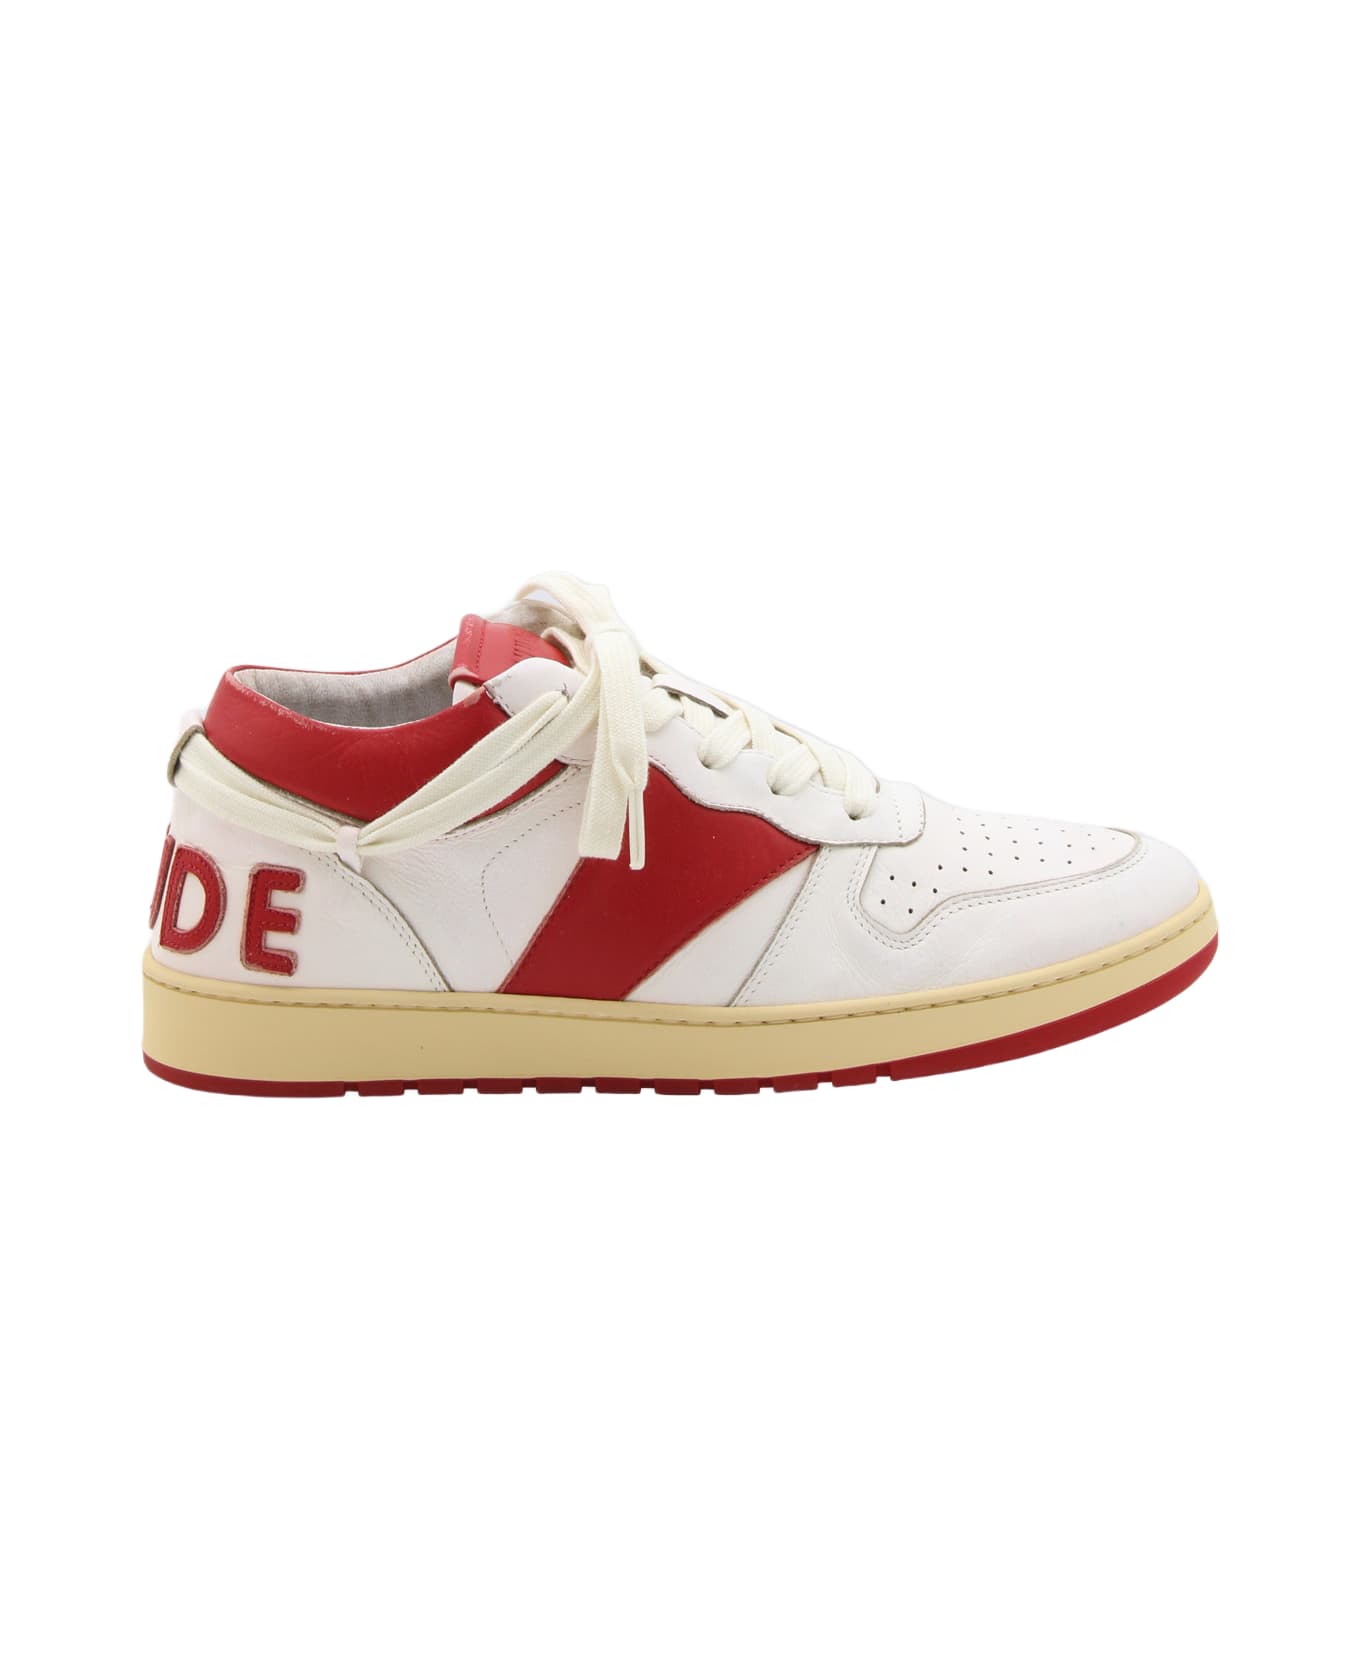 Rhude White And Red Leather Sneakers - White スニーカー